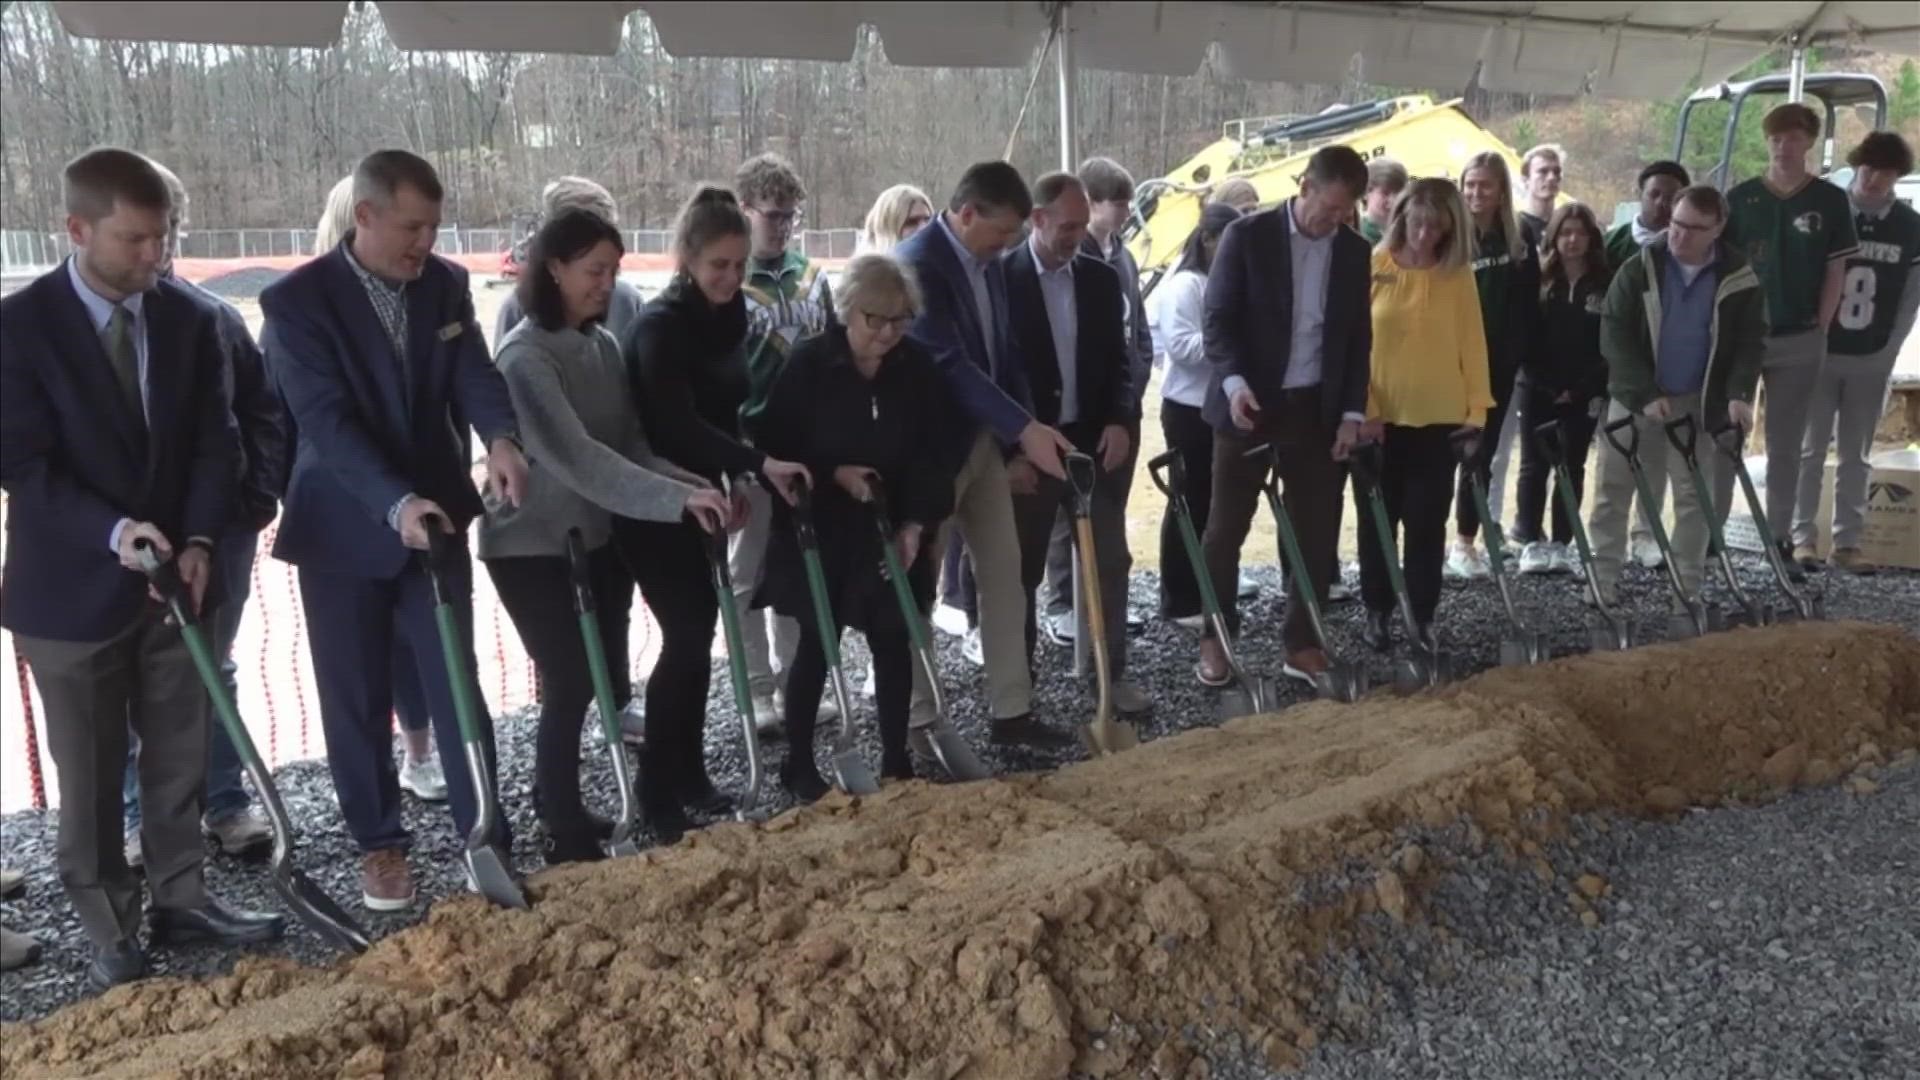 Briarcrest Christian School broke ground Friday on a new $12.8 million Athletic Training and Development Center.